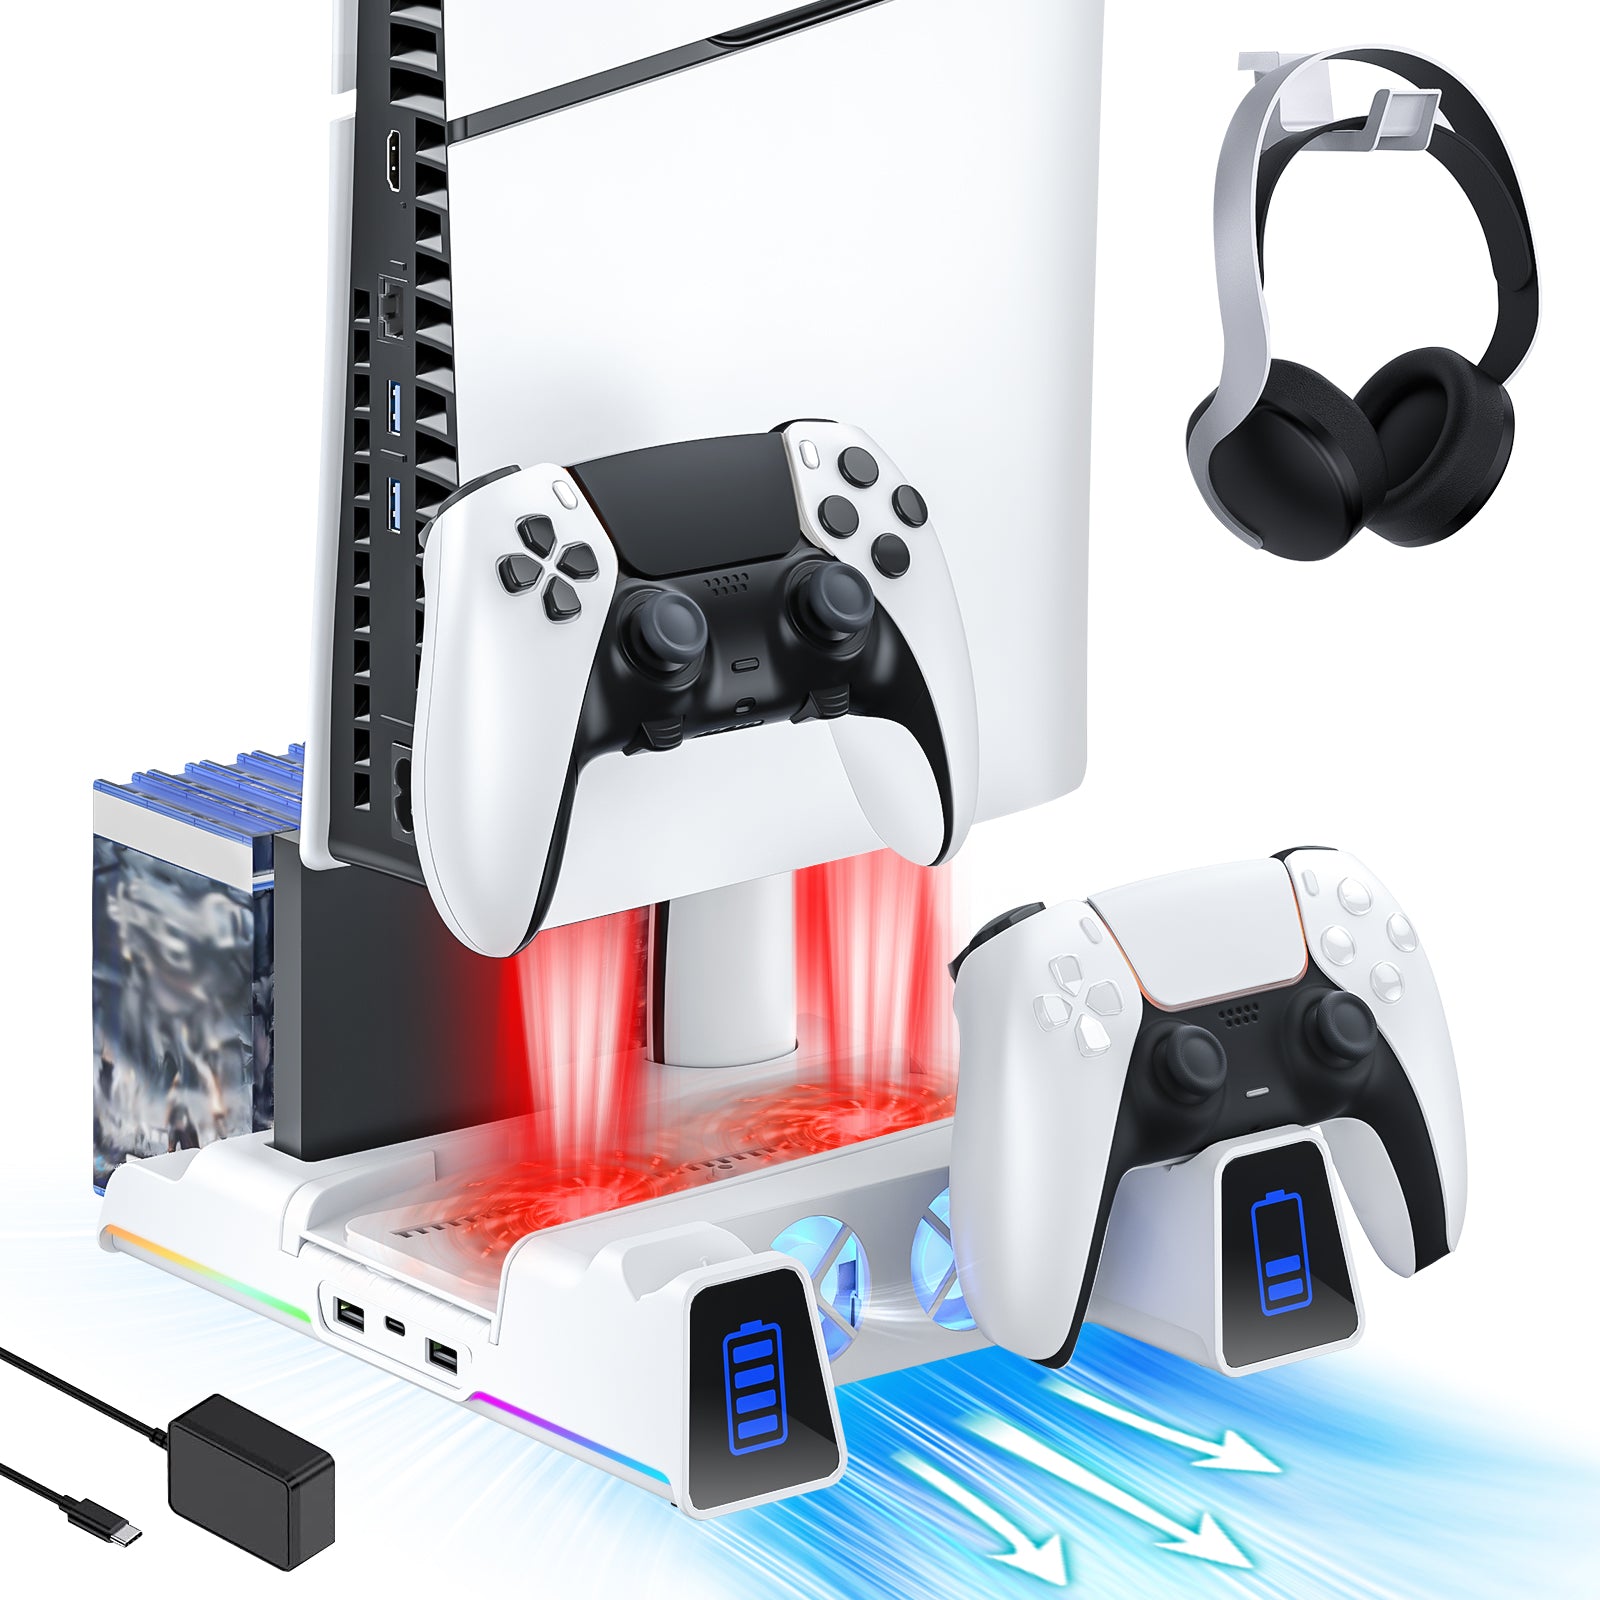 NexiGo white PS5 Silent Cooling Stand with RGB LED Light, Dual Charging Station Compatible with DualSense Edge Controller and PS5 Slim.